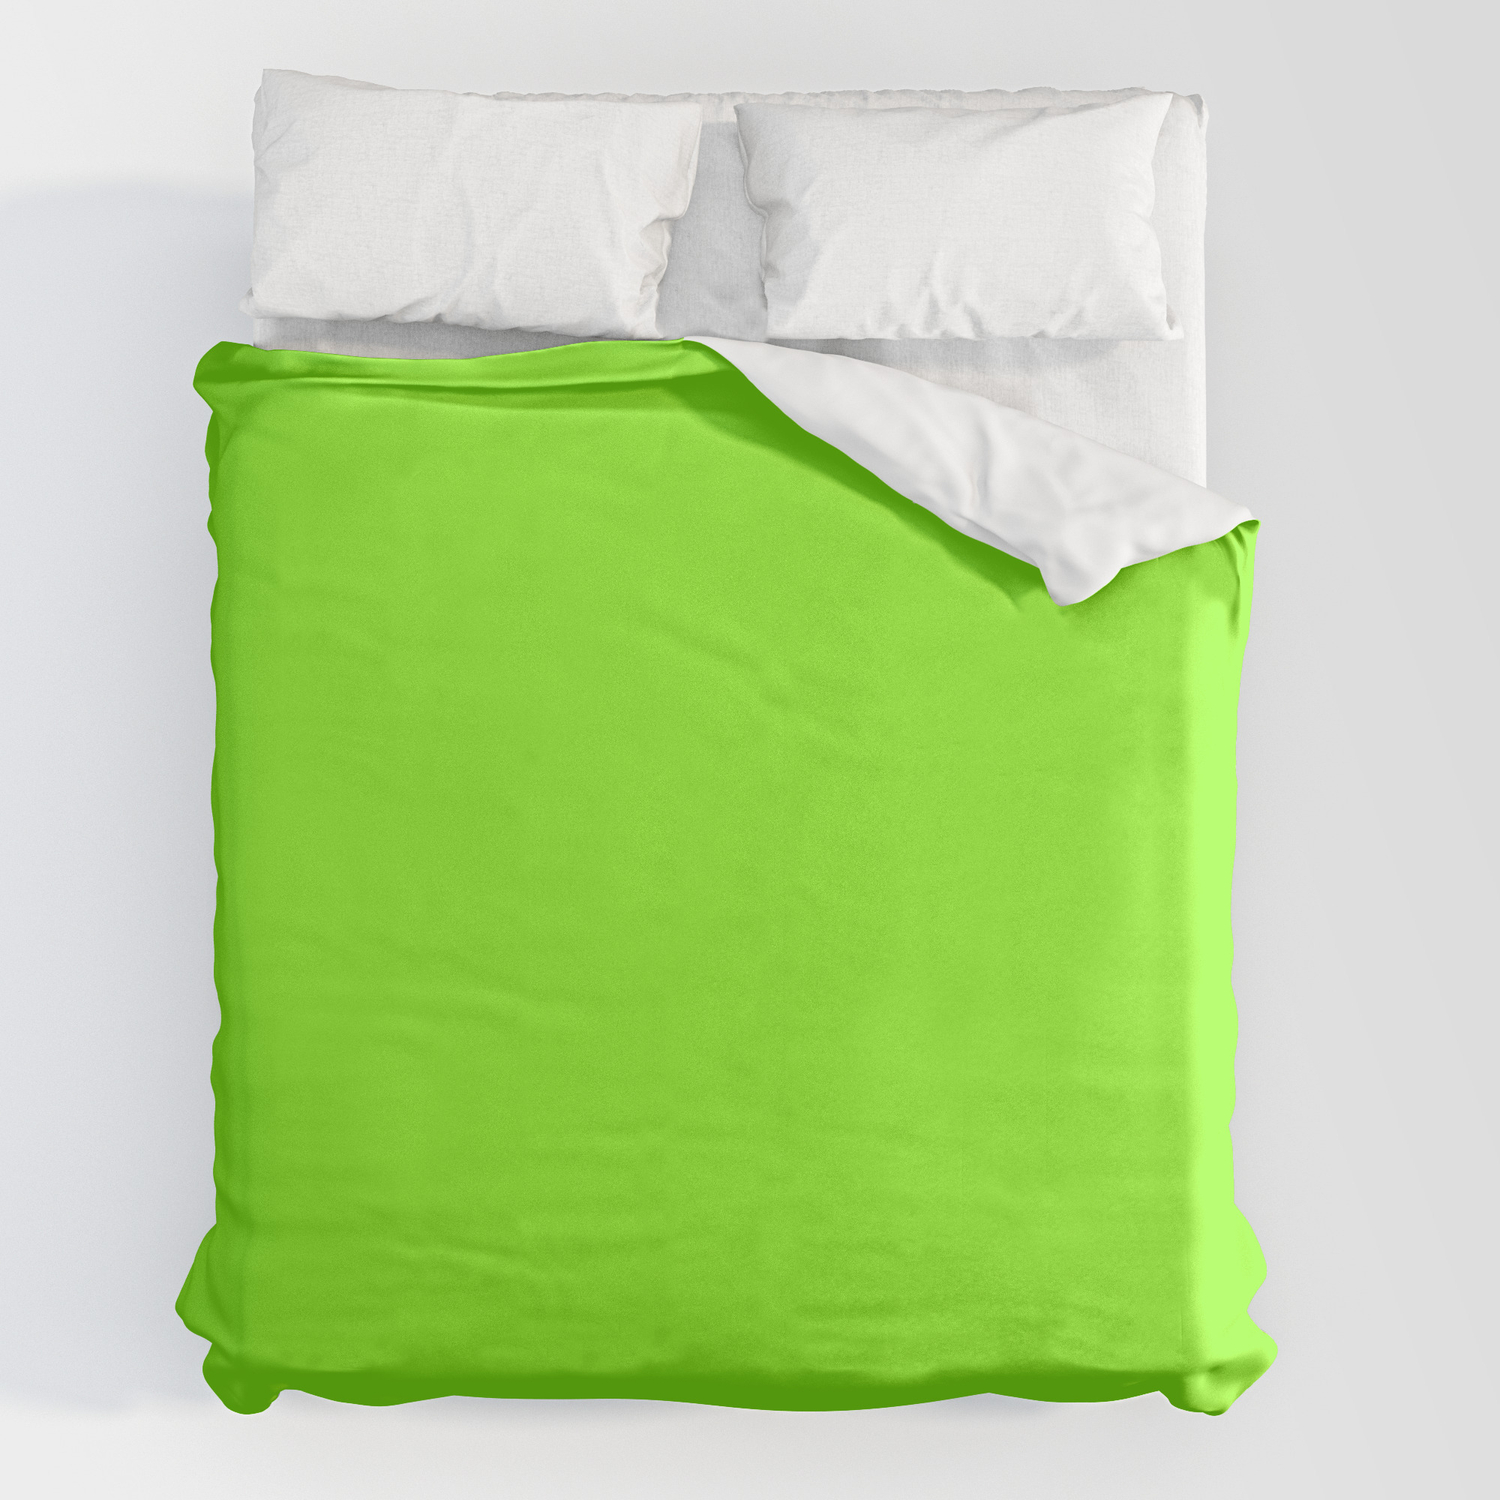 Solid Chartreuse Bright Neon Green, Chartreuse Duvet Cover